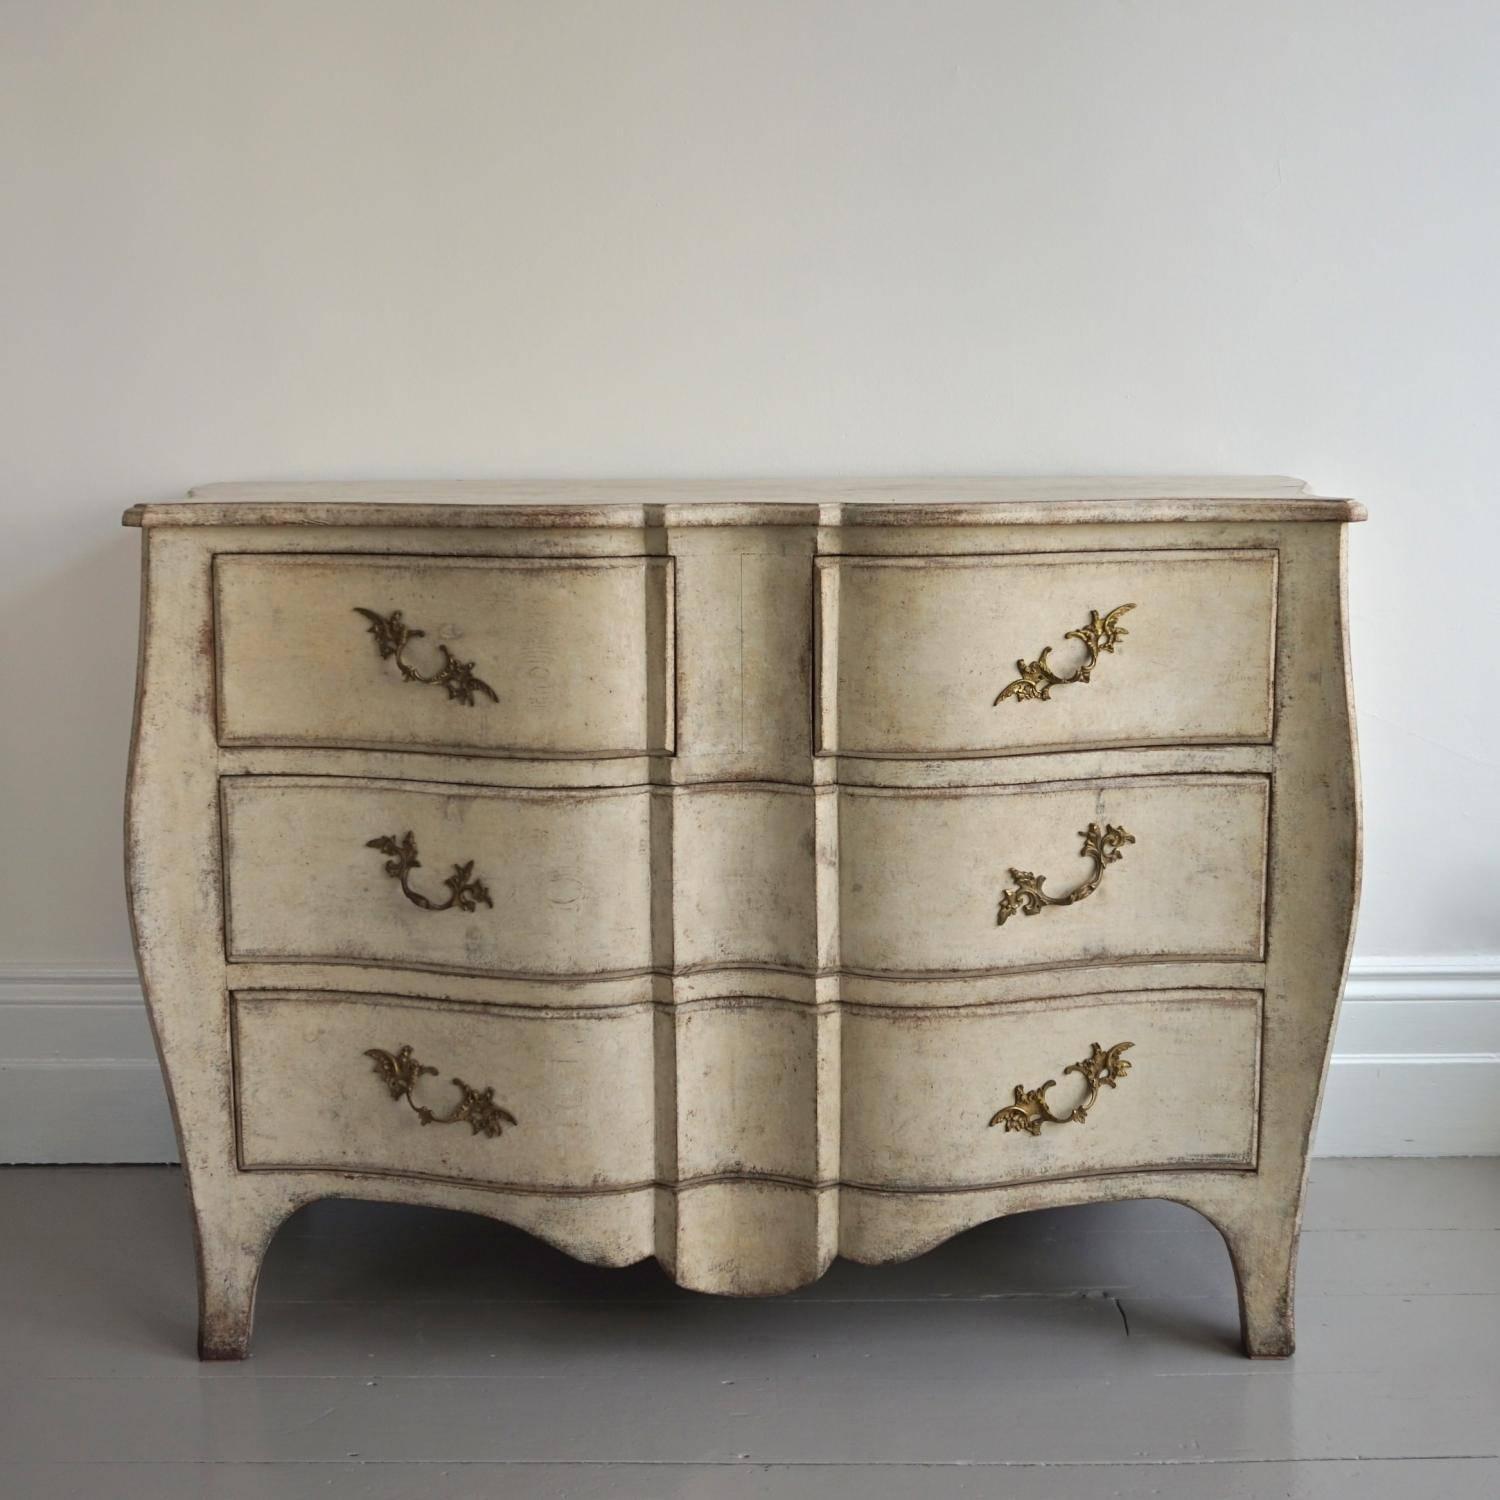 A very fine 19th century Swedish Rococo chest with an exceptional curved serpentine form and carved shaped apron, circa 1850.

Continental US Shipping:
We ship to the United States quickly and safely using FedEx International Airfreight. All our